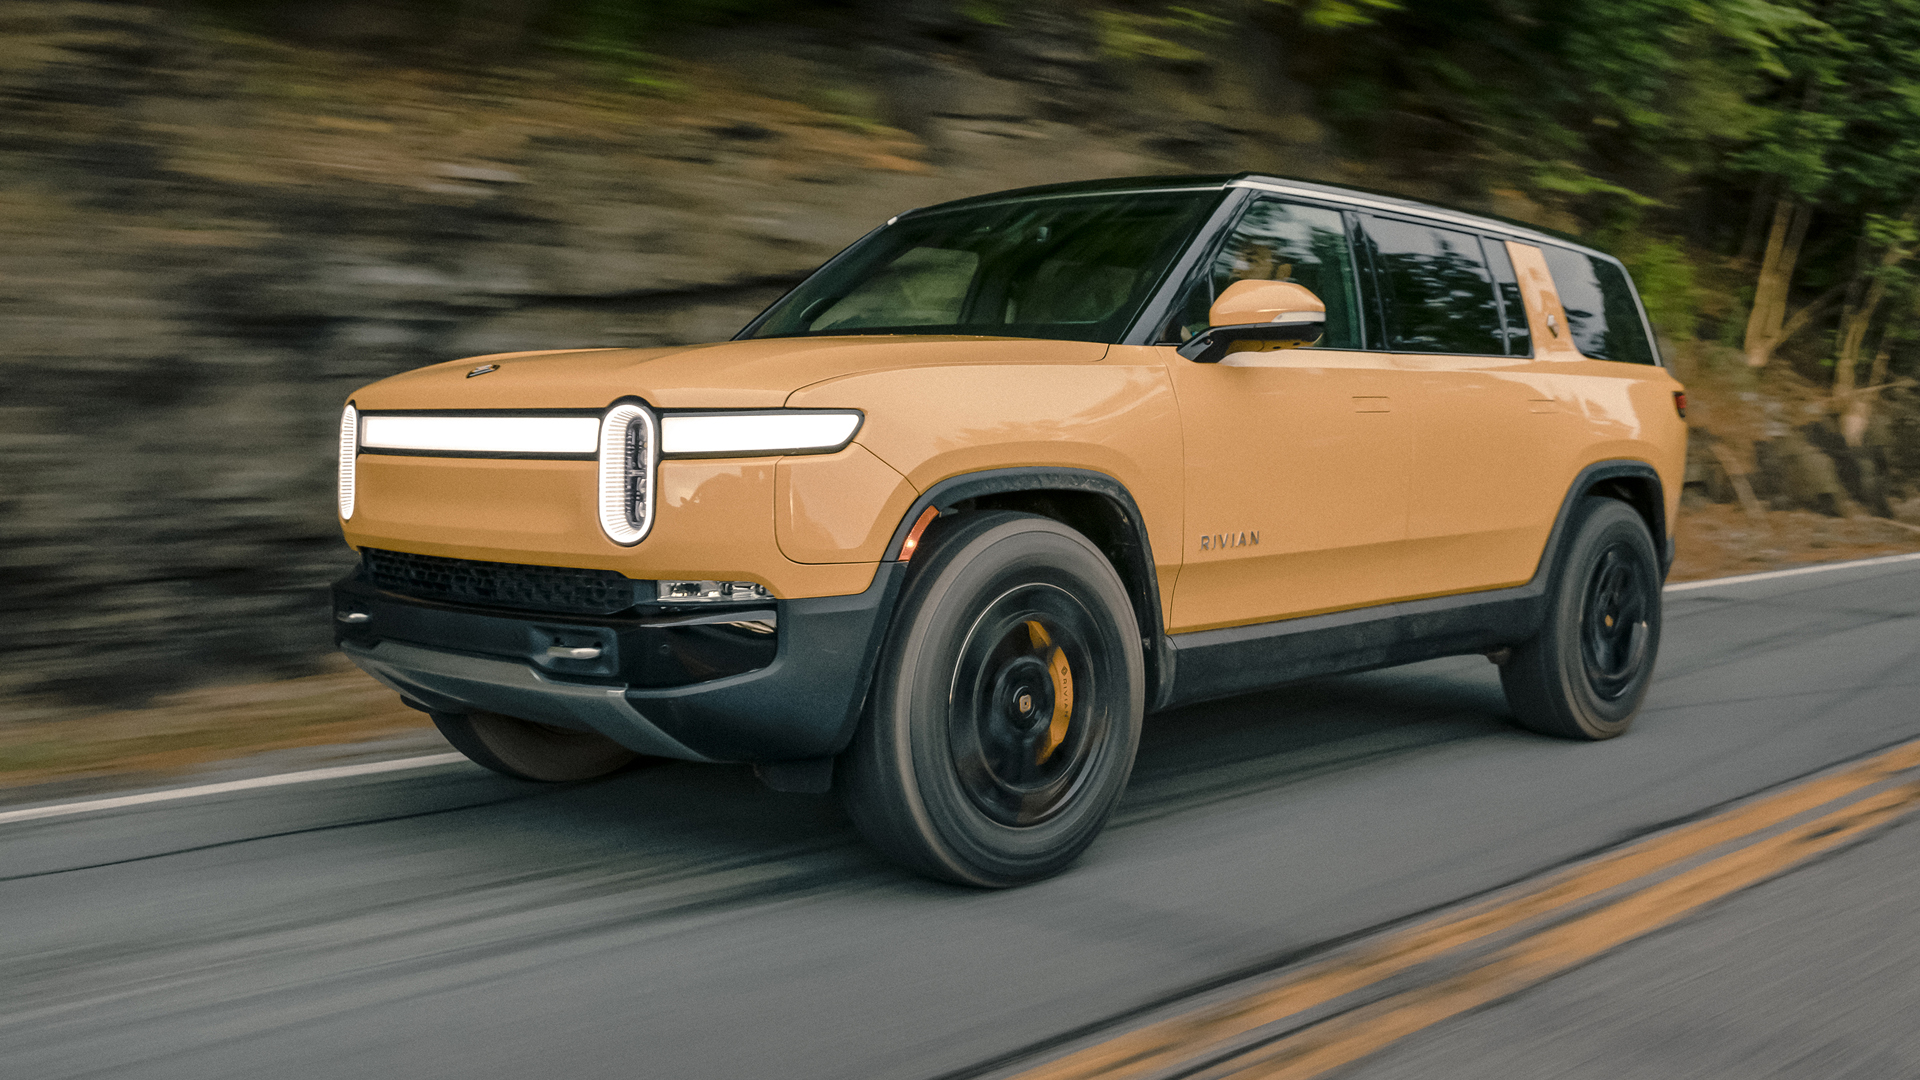 Rivian R1S First Drive Review The SUV finally arrives! (Sort of)